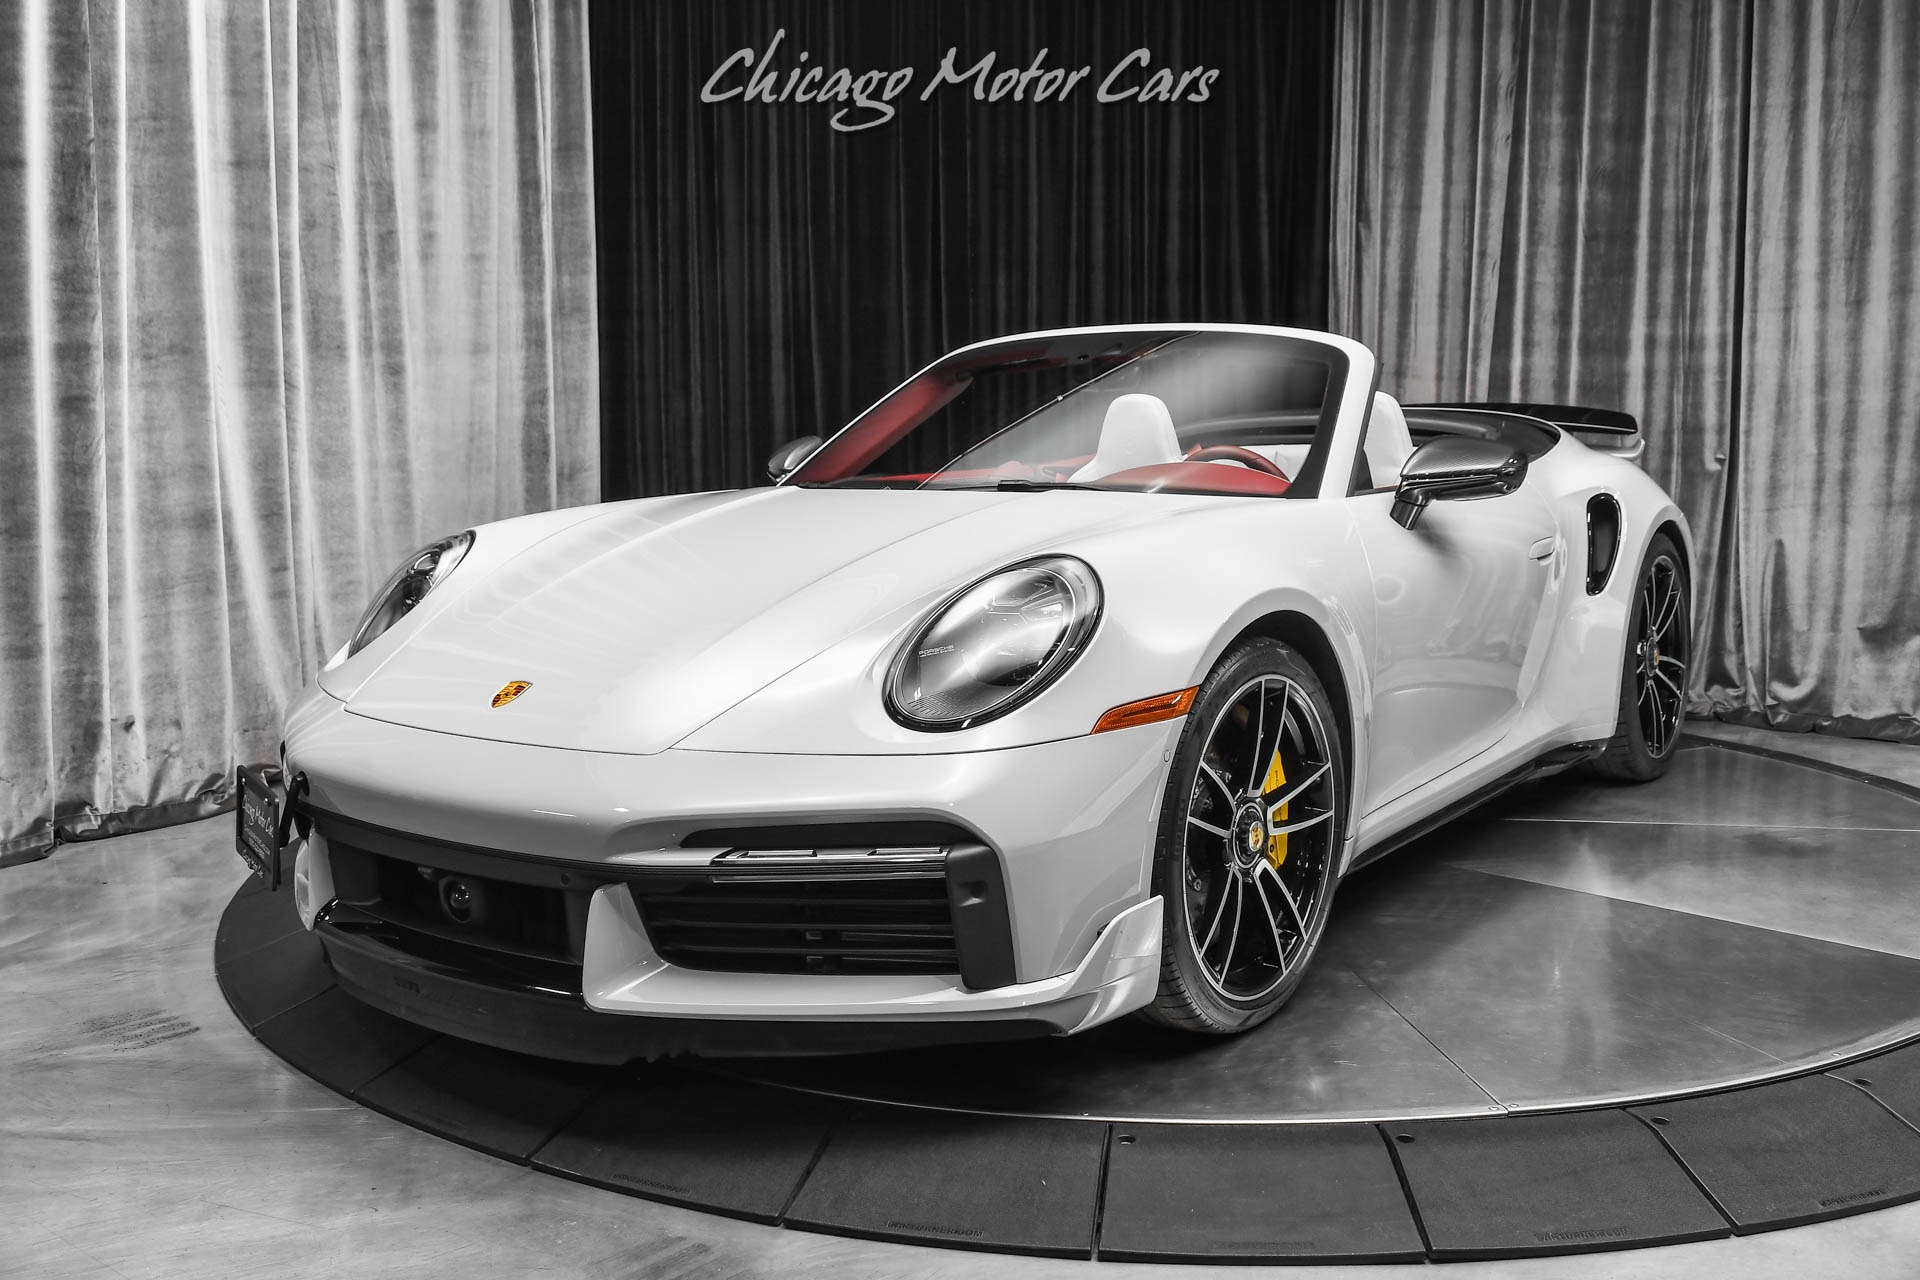 Used-2022-Porsche-911-Turbo-S-Cabriolet-HIGH-SPEC-Only-1400-Miles-ChalkRed-LOADED-Perfect